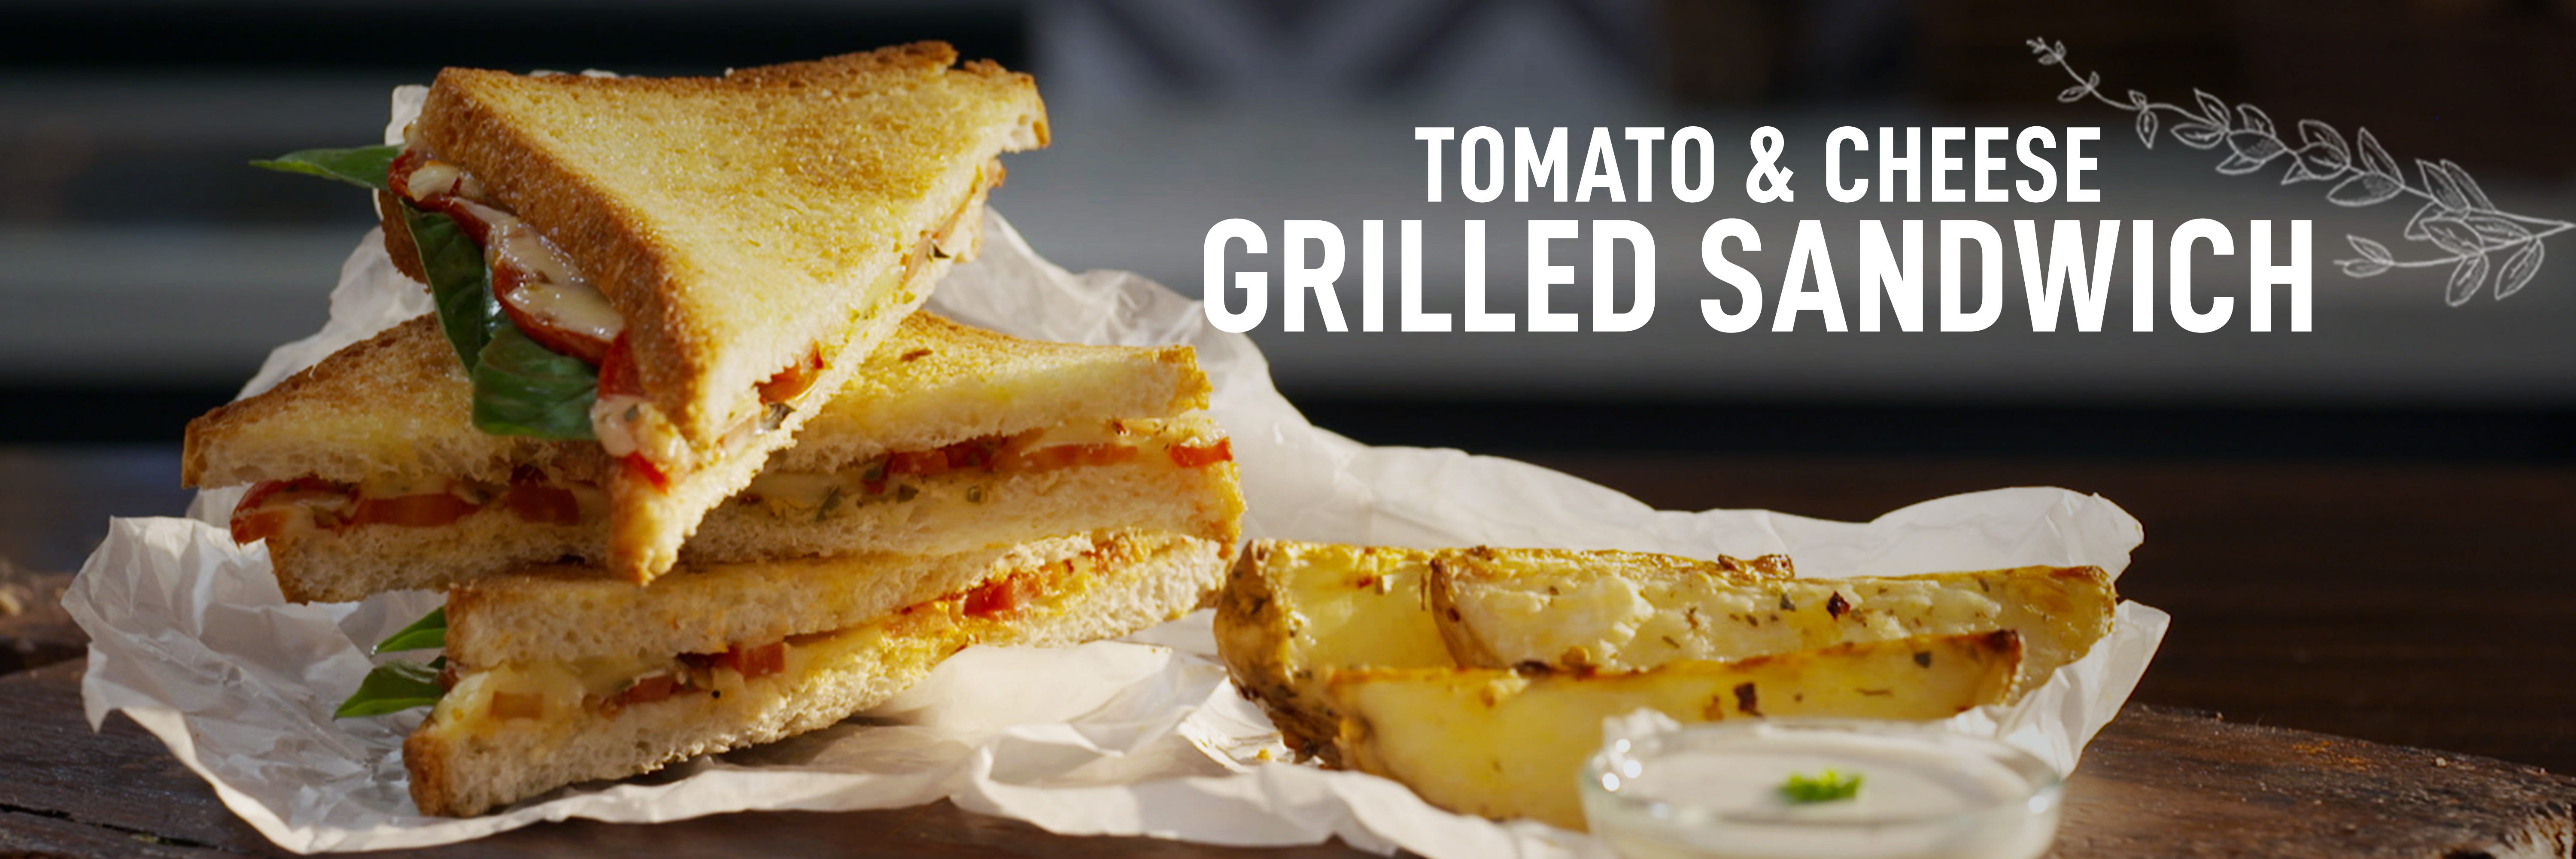 Tomato & Cheese Grilled Sandwich in Microwave